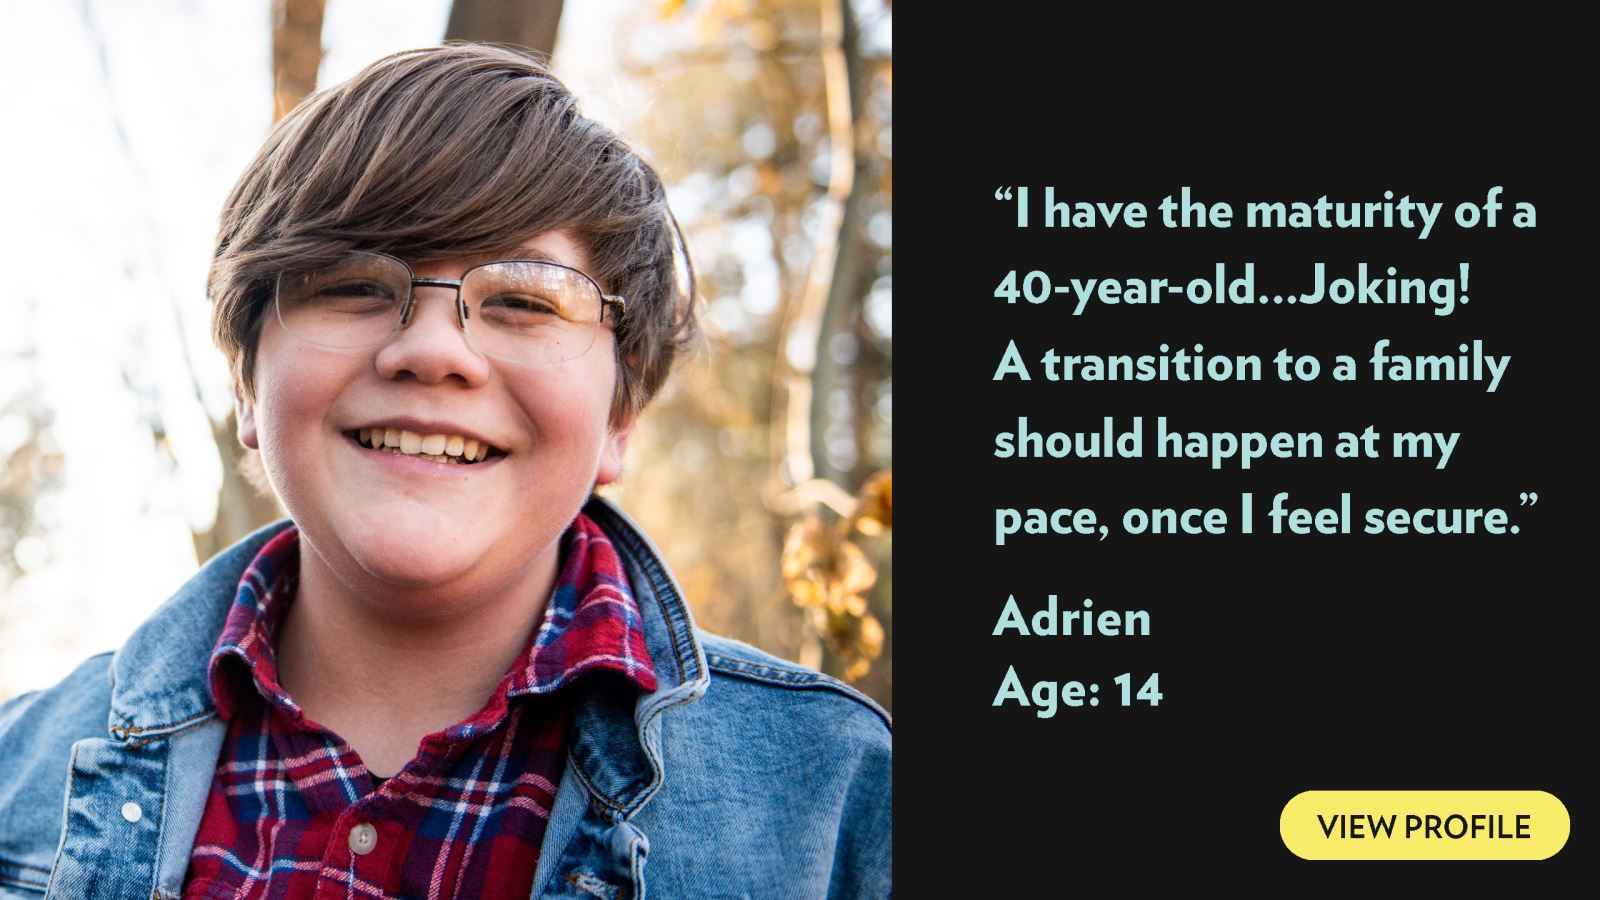 I have the maturity of a 40-year-old... Joking! A transition to a family should happen at my pace, once I feel secure. Adrien, age 14. View profile.